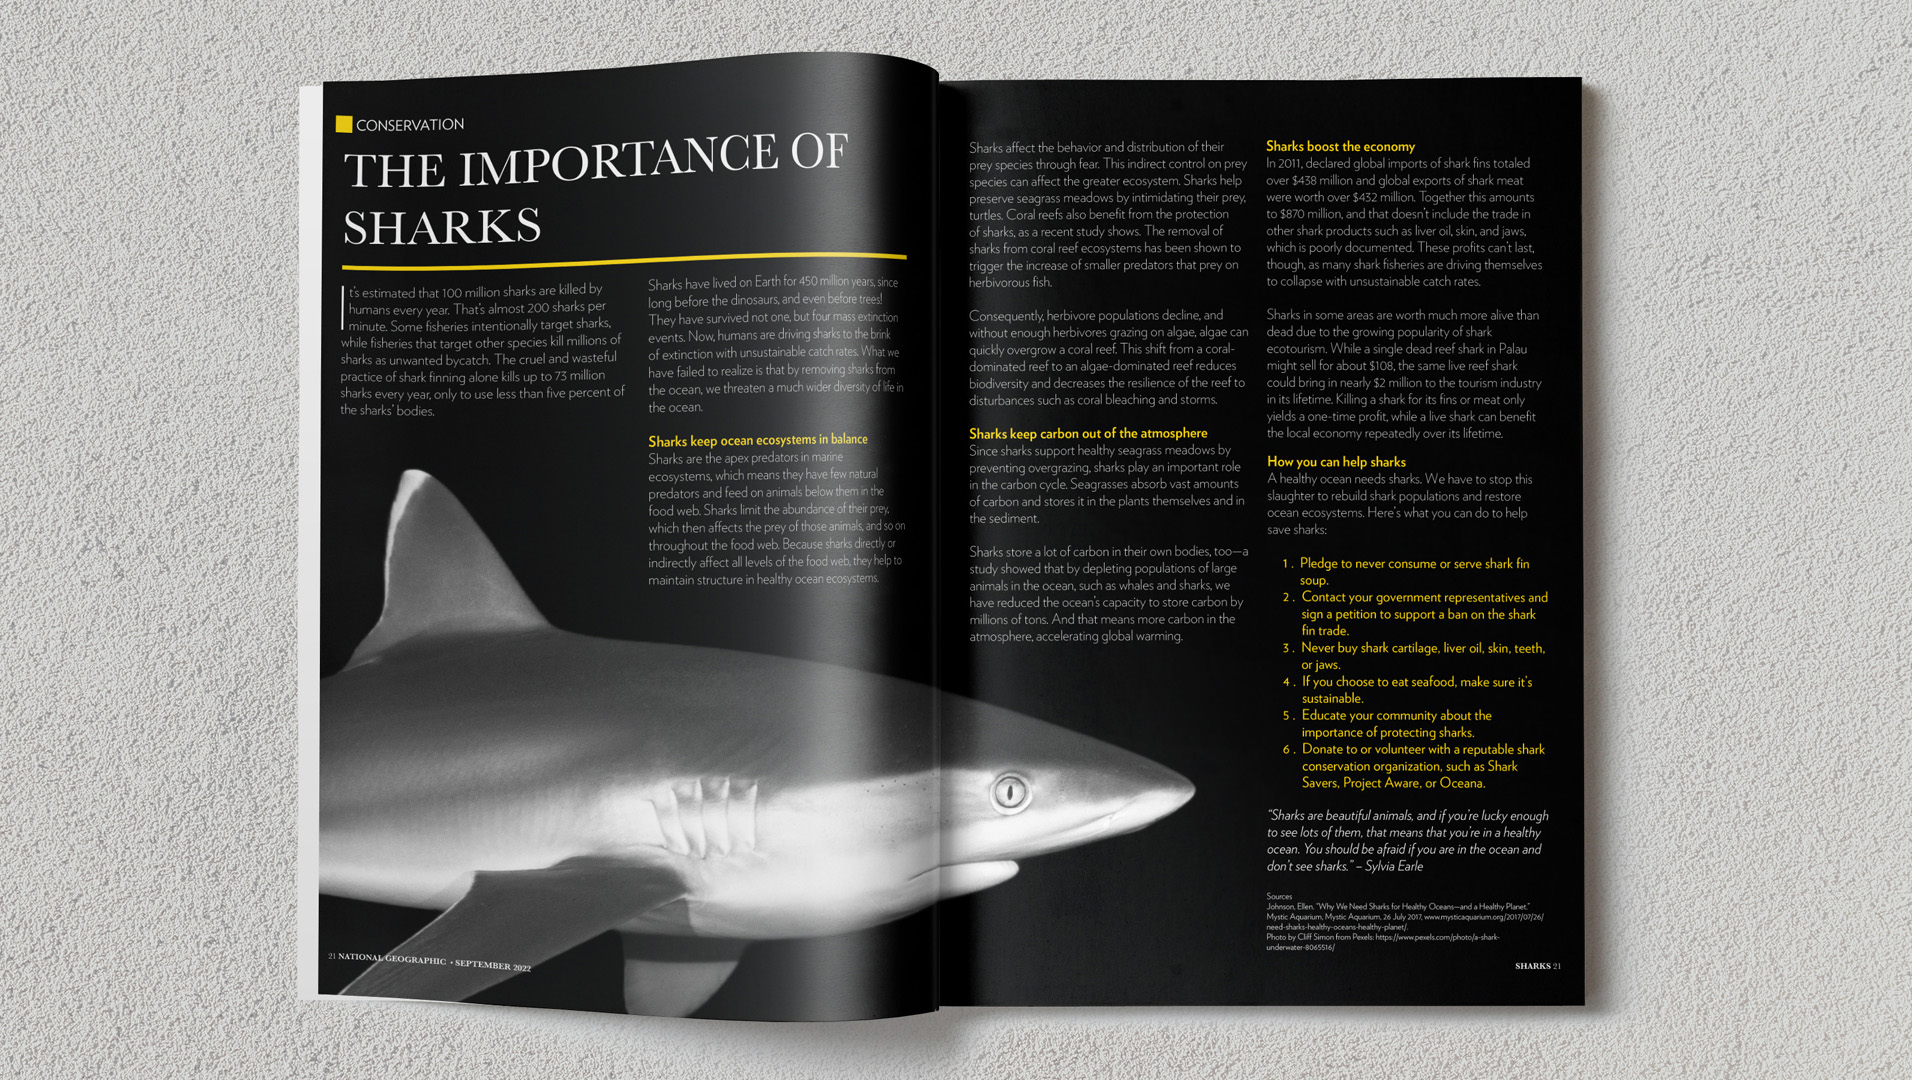 "National Geographic Magazine Spread,"  / "National Geographic Magazine Spread," printed spread, 6.5 x 9 inch printed, 2022. A magazine spread for the importance of sharks that imitates the style of National Geographic. 